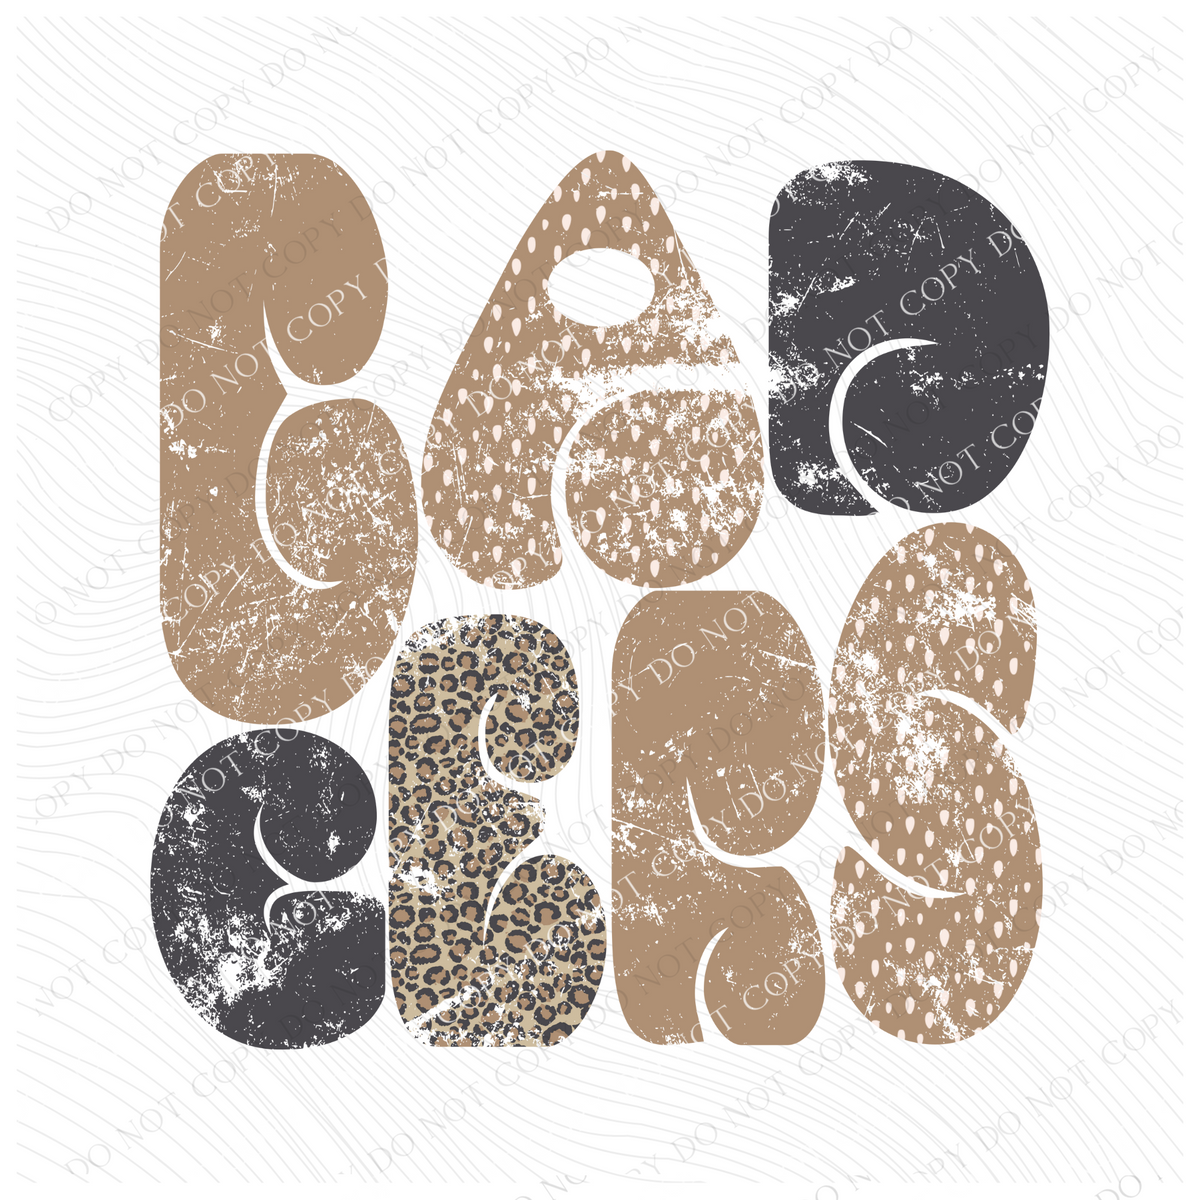 Badgers Chubby Retro Distressed Leopard print in tones of Tans & Faded Black Digital Design, PNG